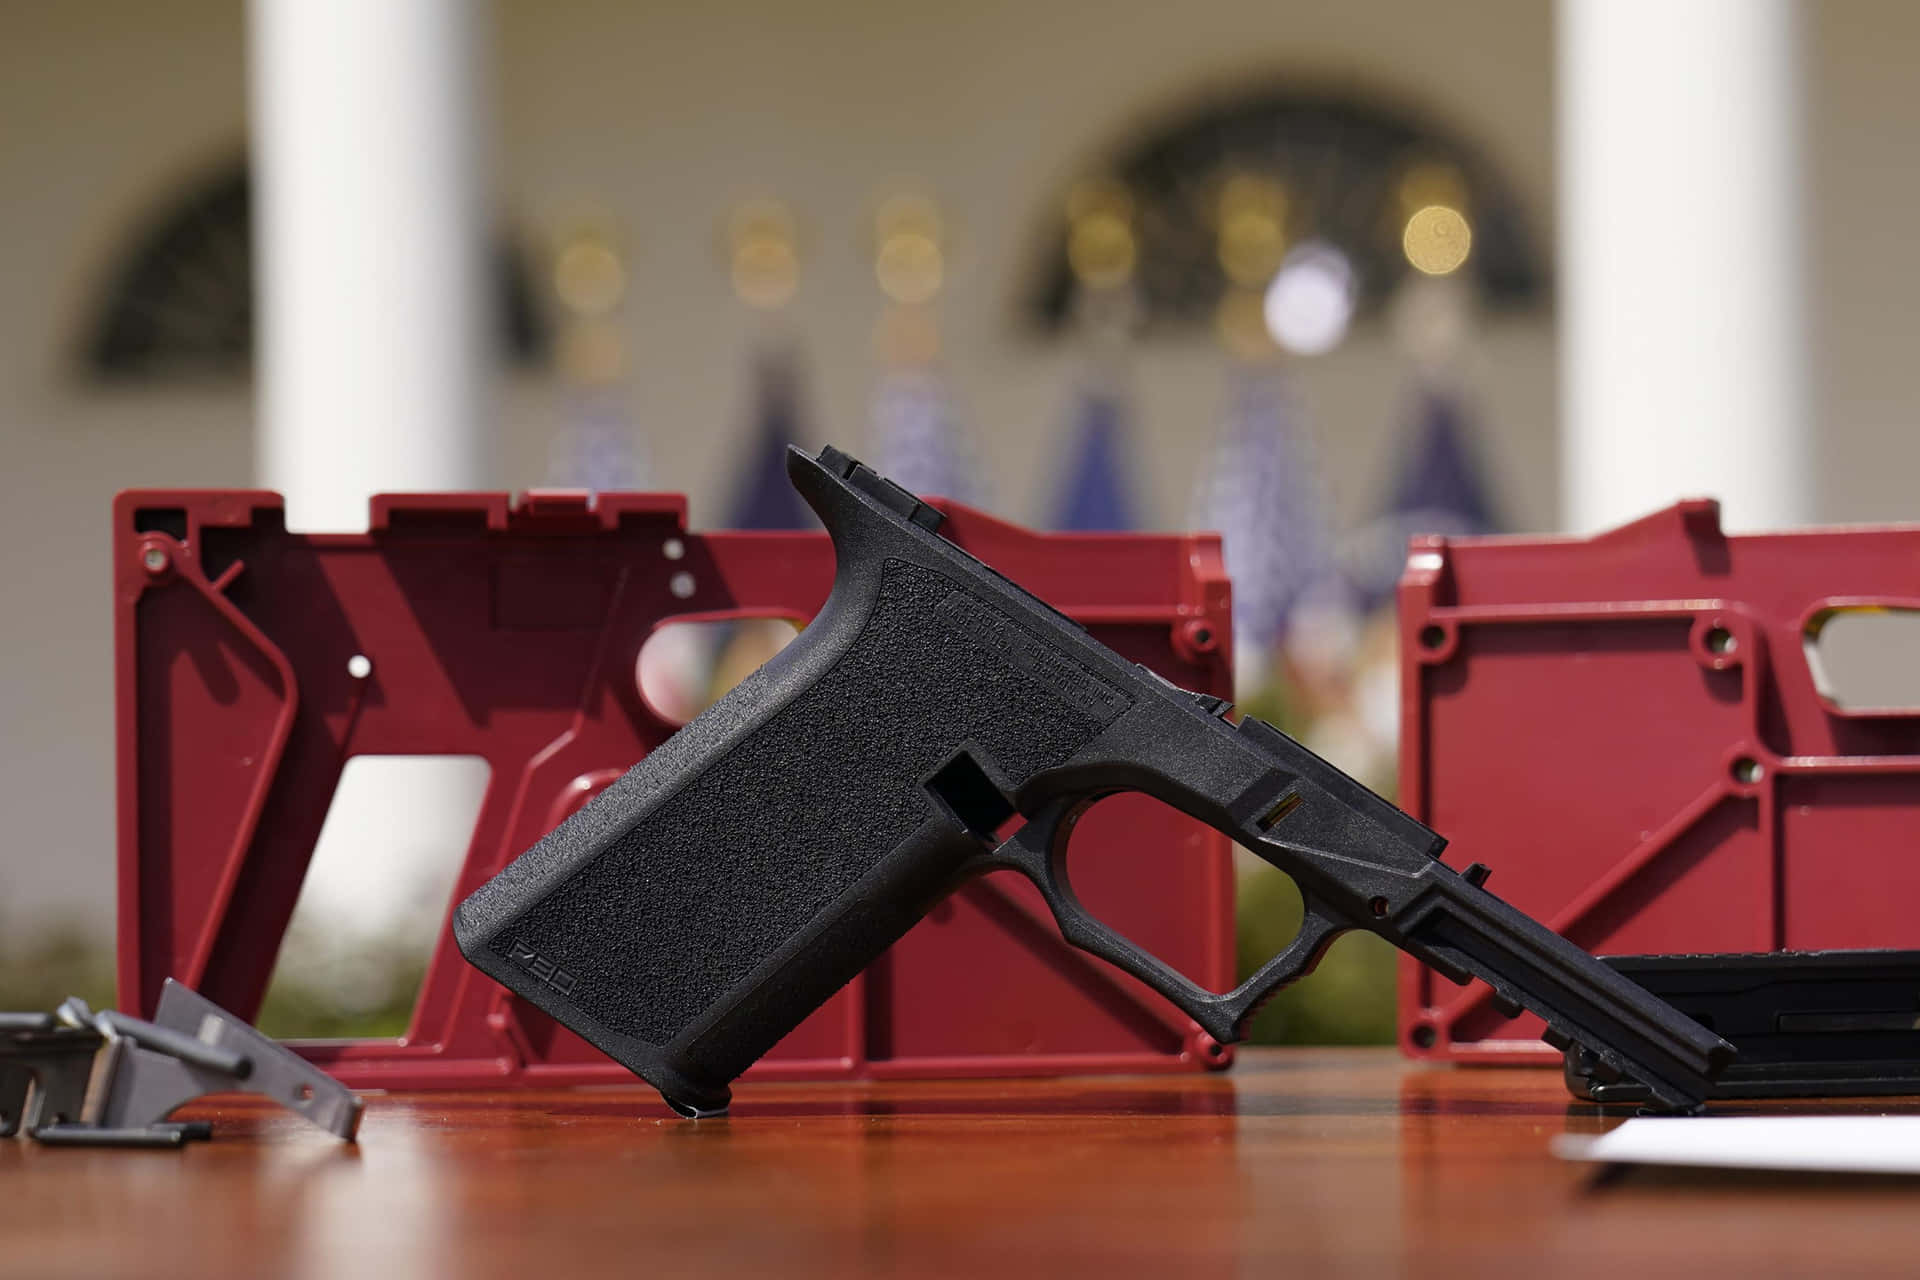 A Gun Is Sitting On A Table Next To A White House